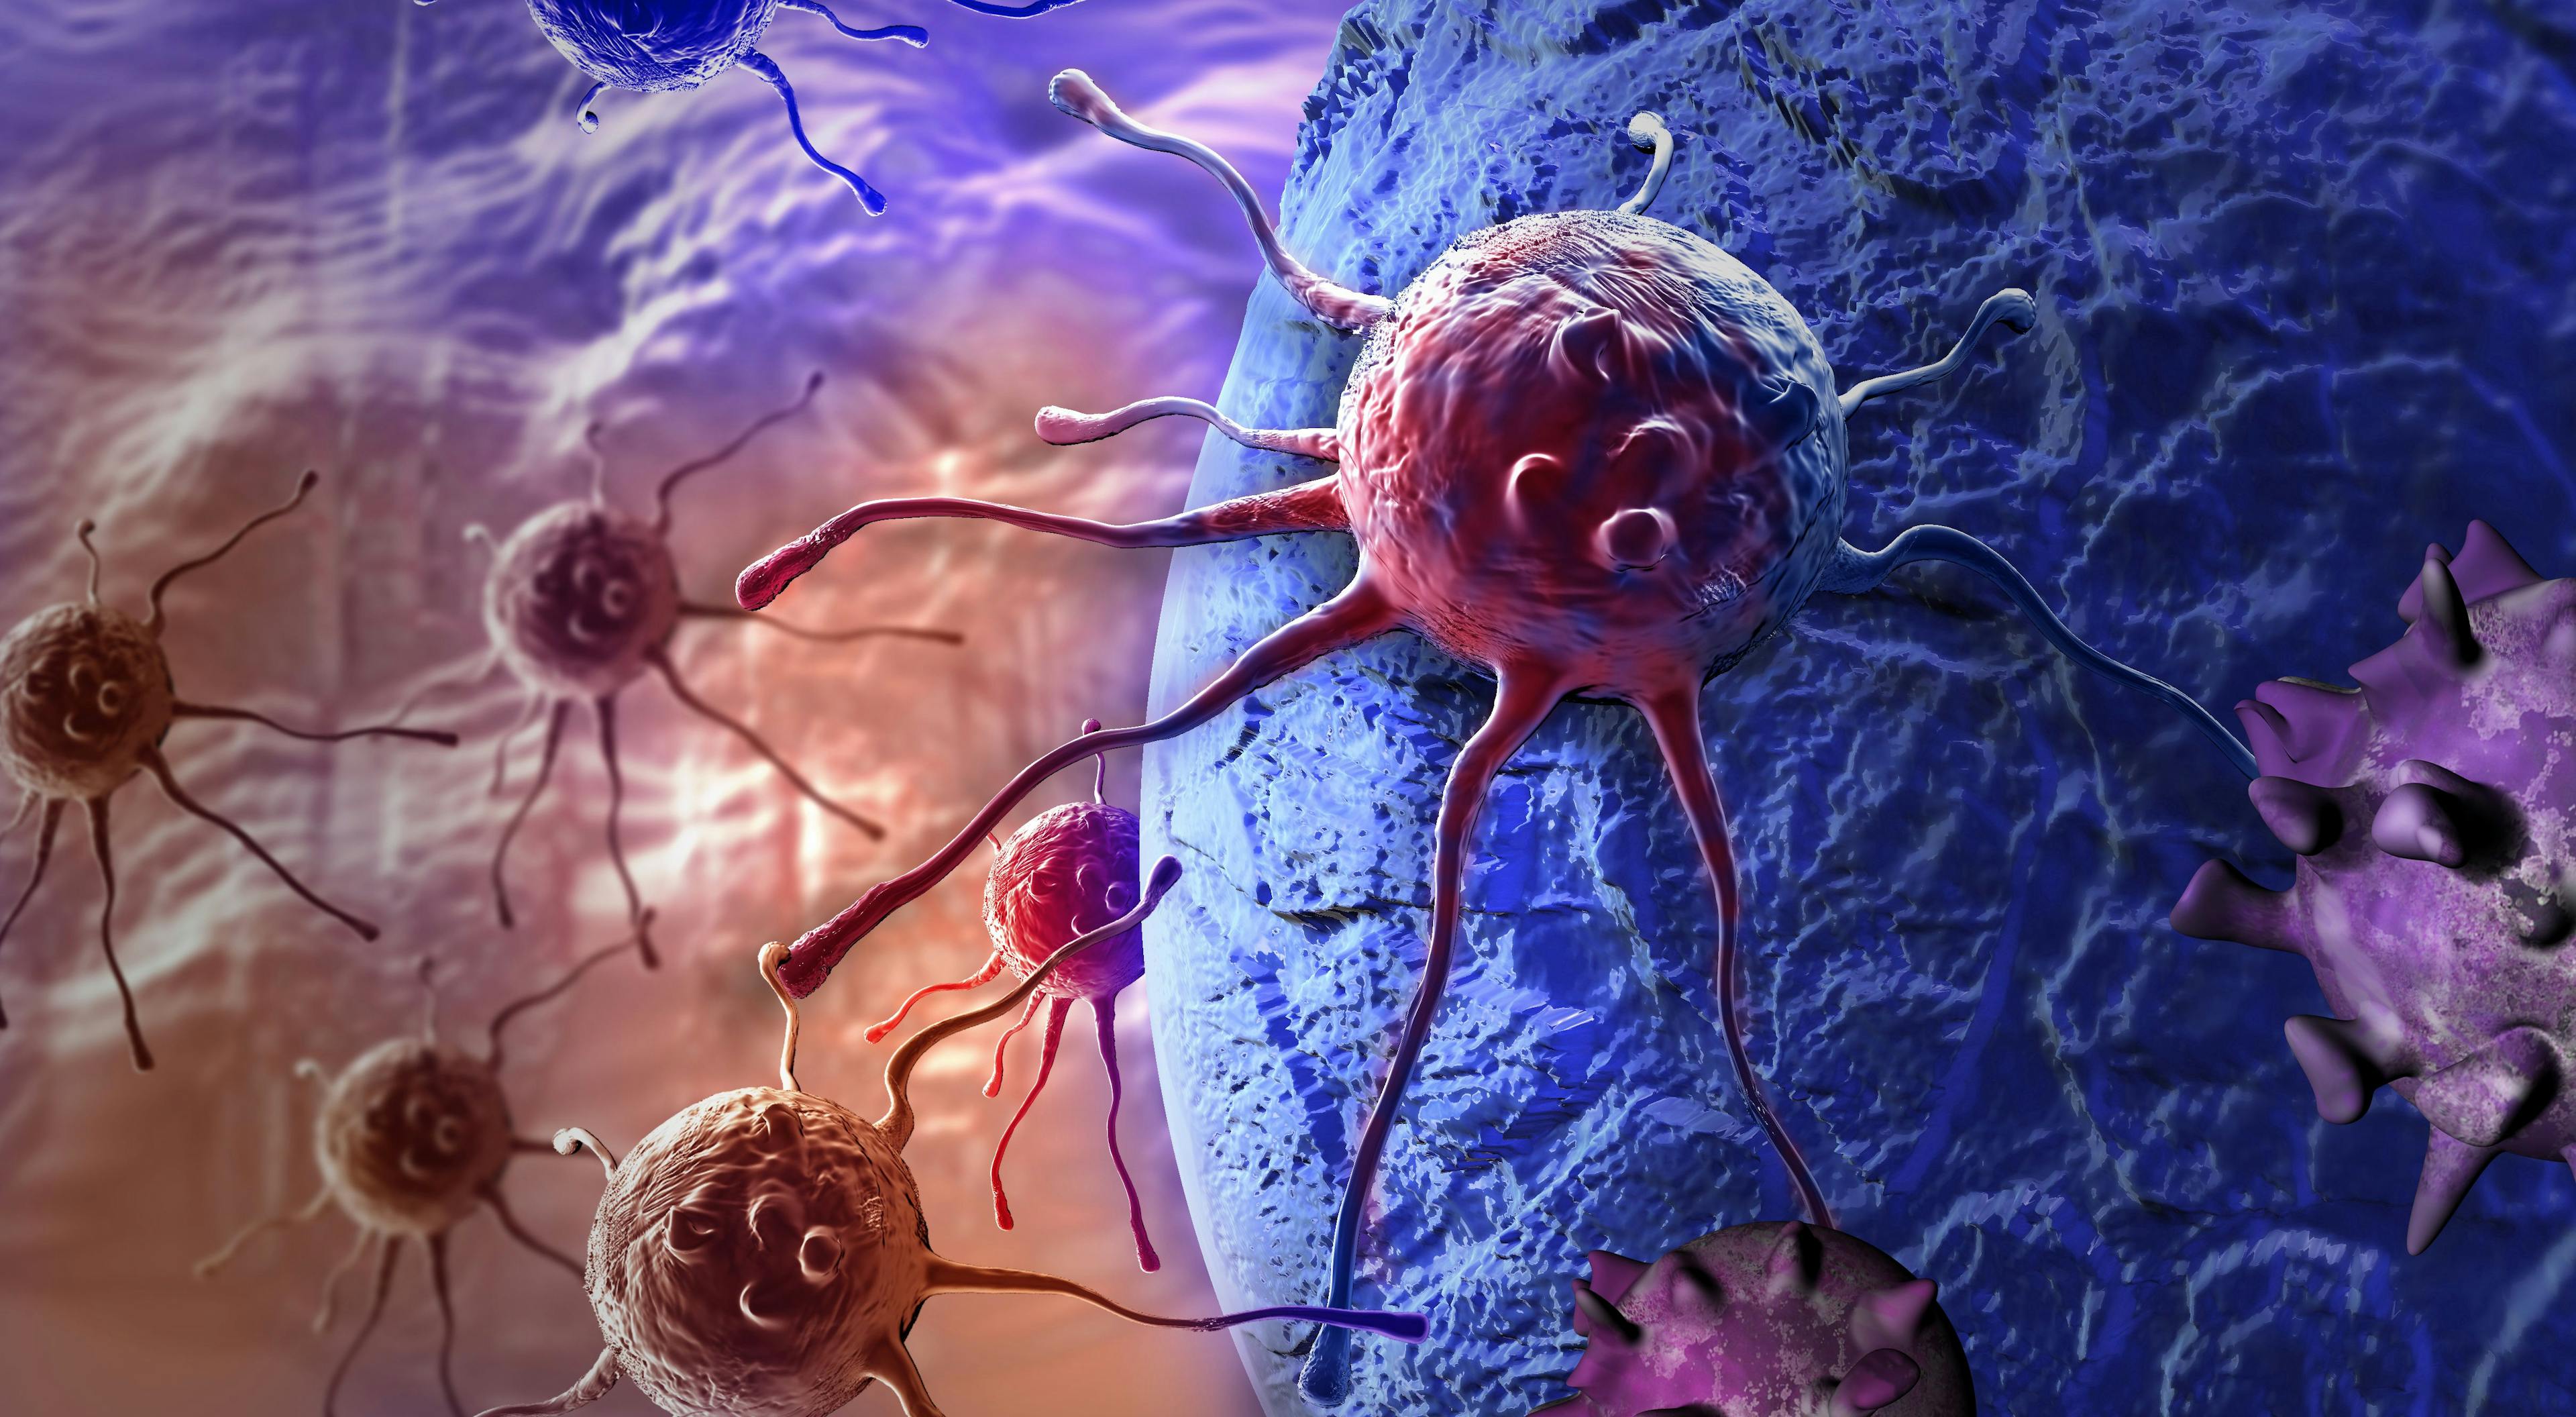 Image of CAR-T cell therapy